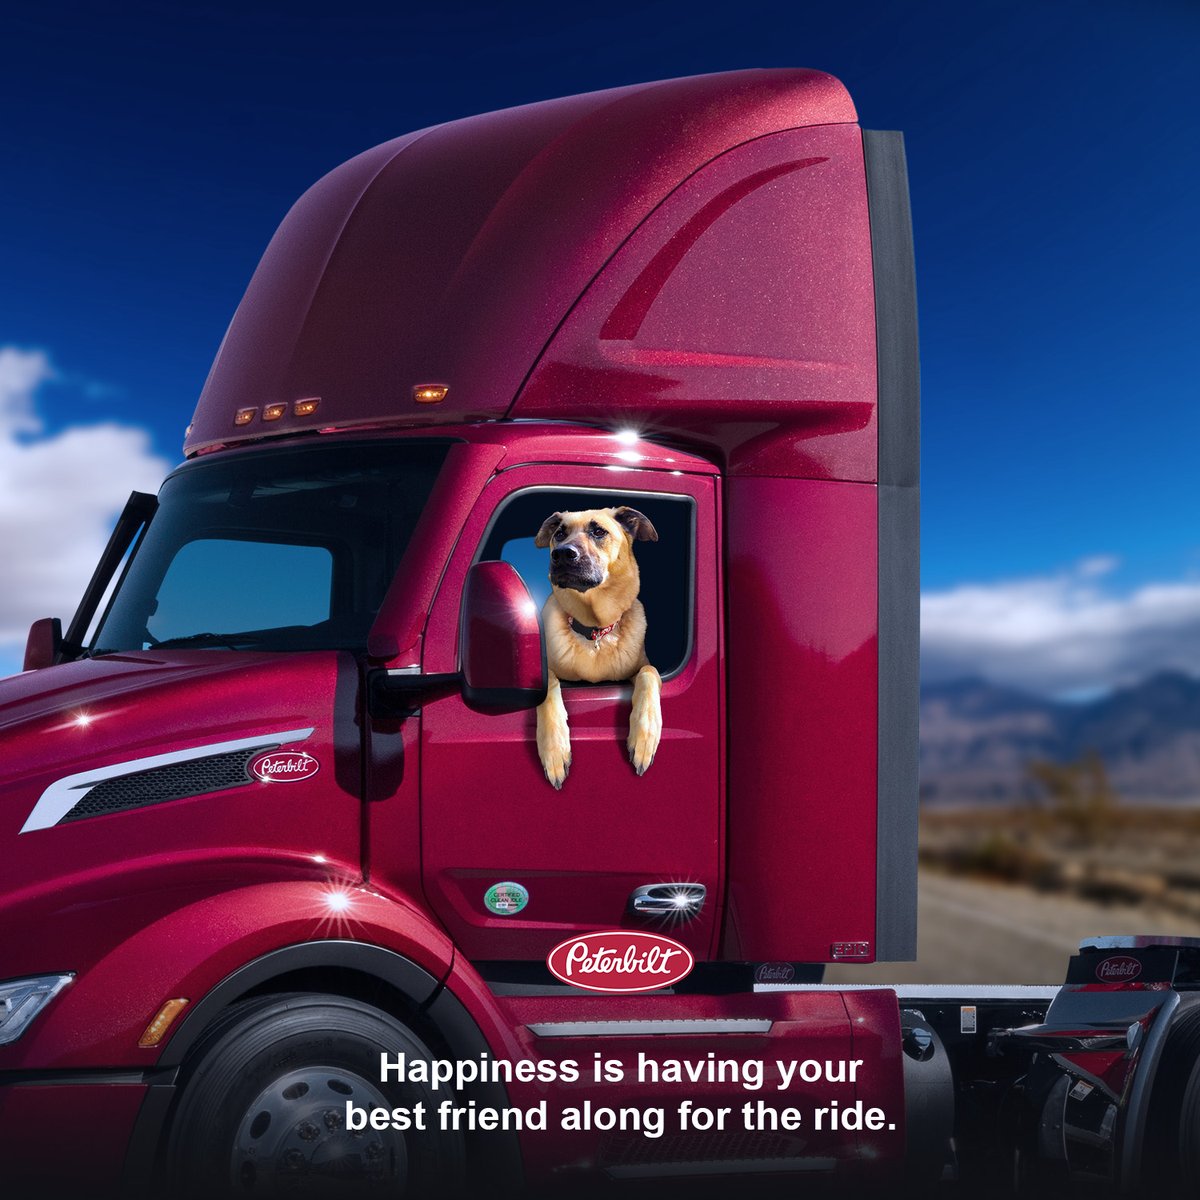 Happy National Pet Day to our favorite co-pilots! Share a photo of your pet with your Peterbilt at the link below for a chance to get featured! bit.ly/PBPictureForm #Peterbilt #PeterbiltTrucks #PeterbiltPets #NationalPetDay